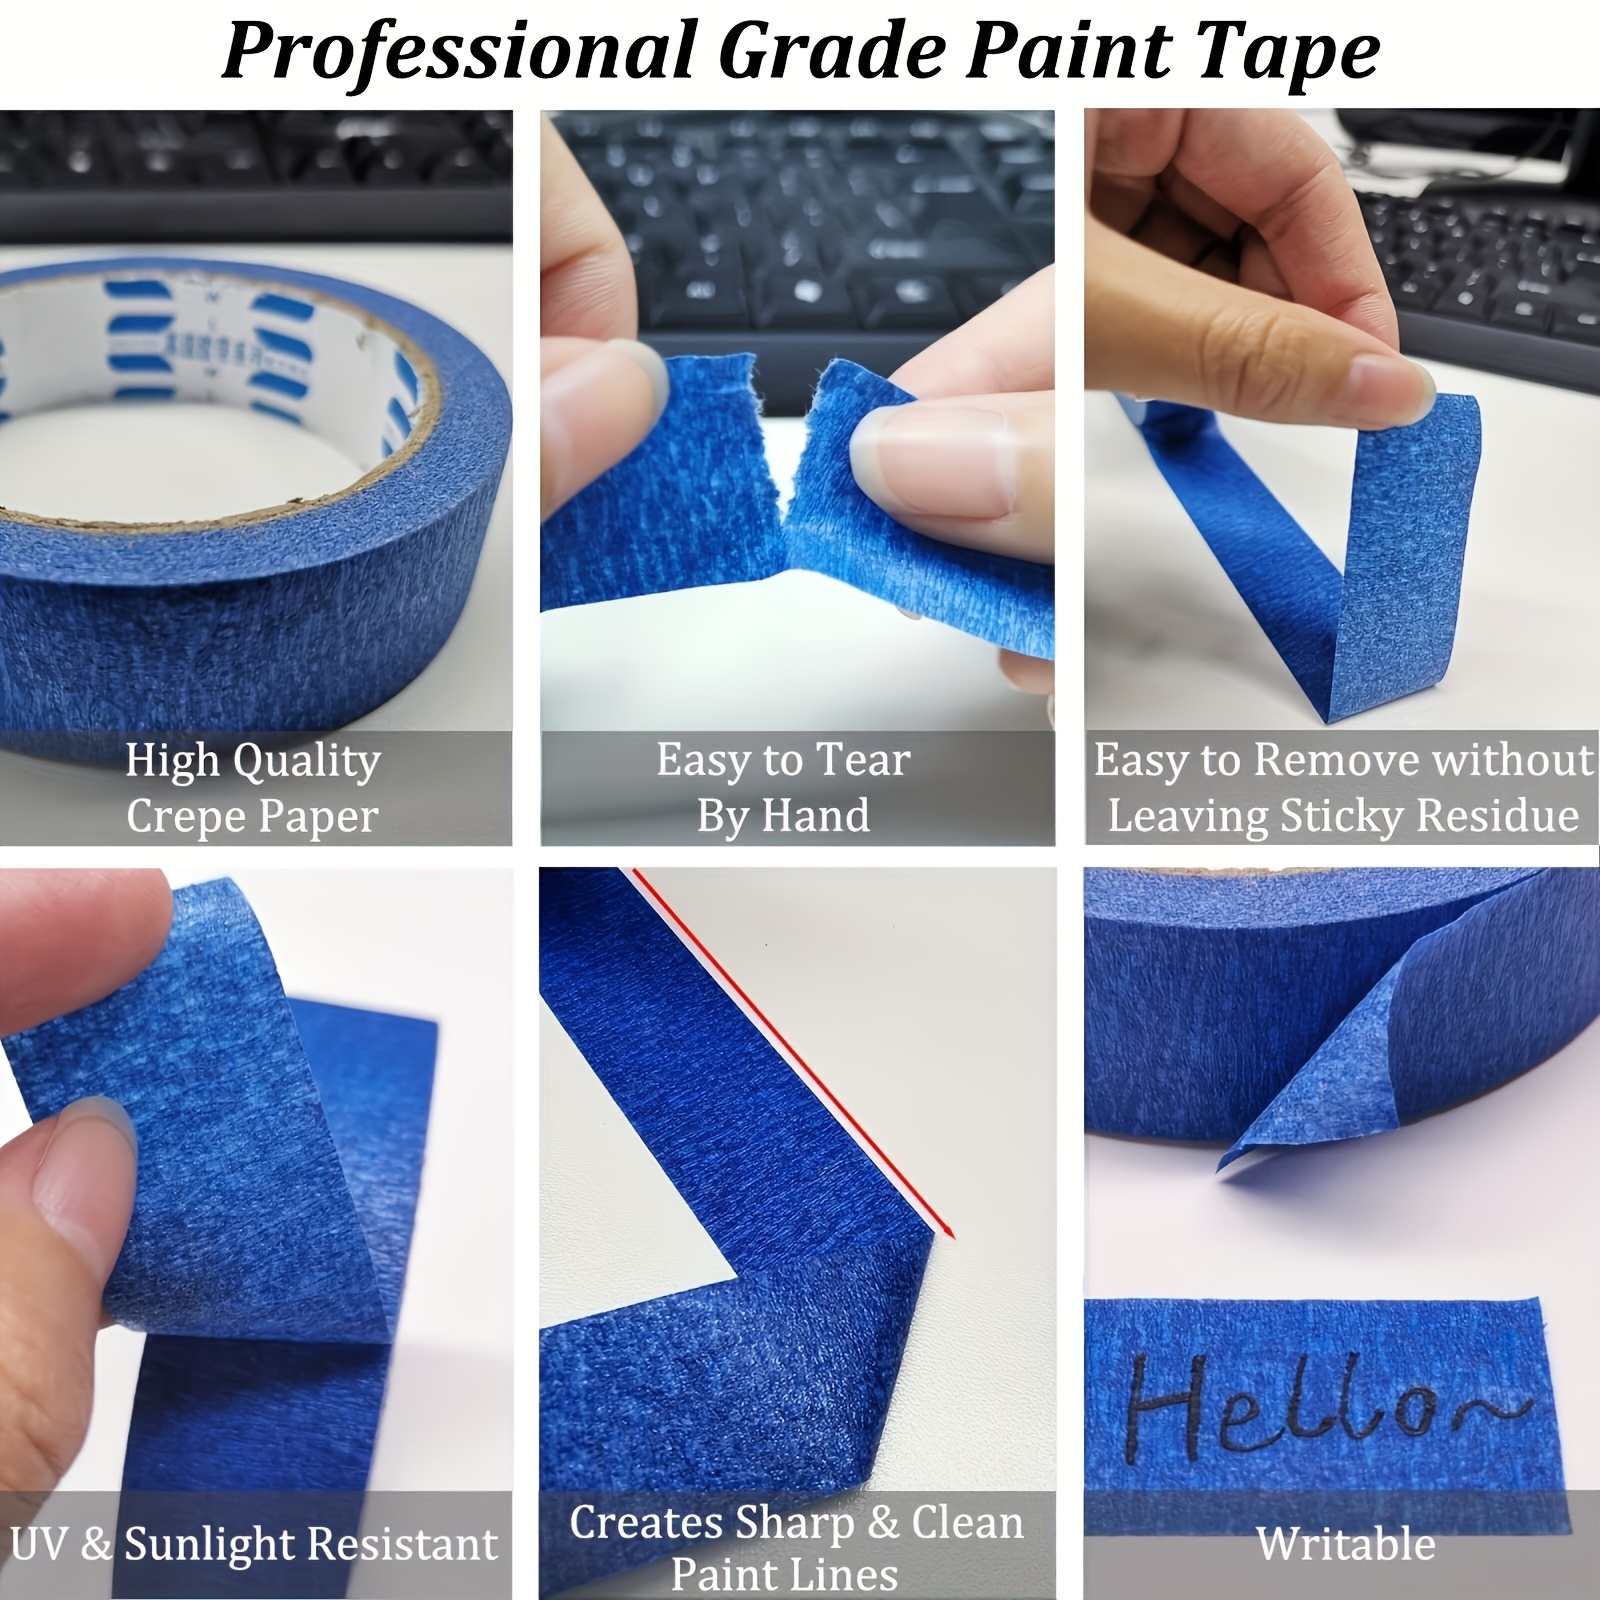 Multi-Surface Blue Painters Tape - 1 in Masking Tape for Painting, Crafts, DIY - Professional Grade Paint Tape UV Resistant, 0.94 in x 60 yd (6 Rolls)